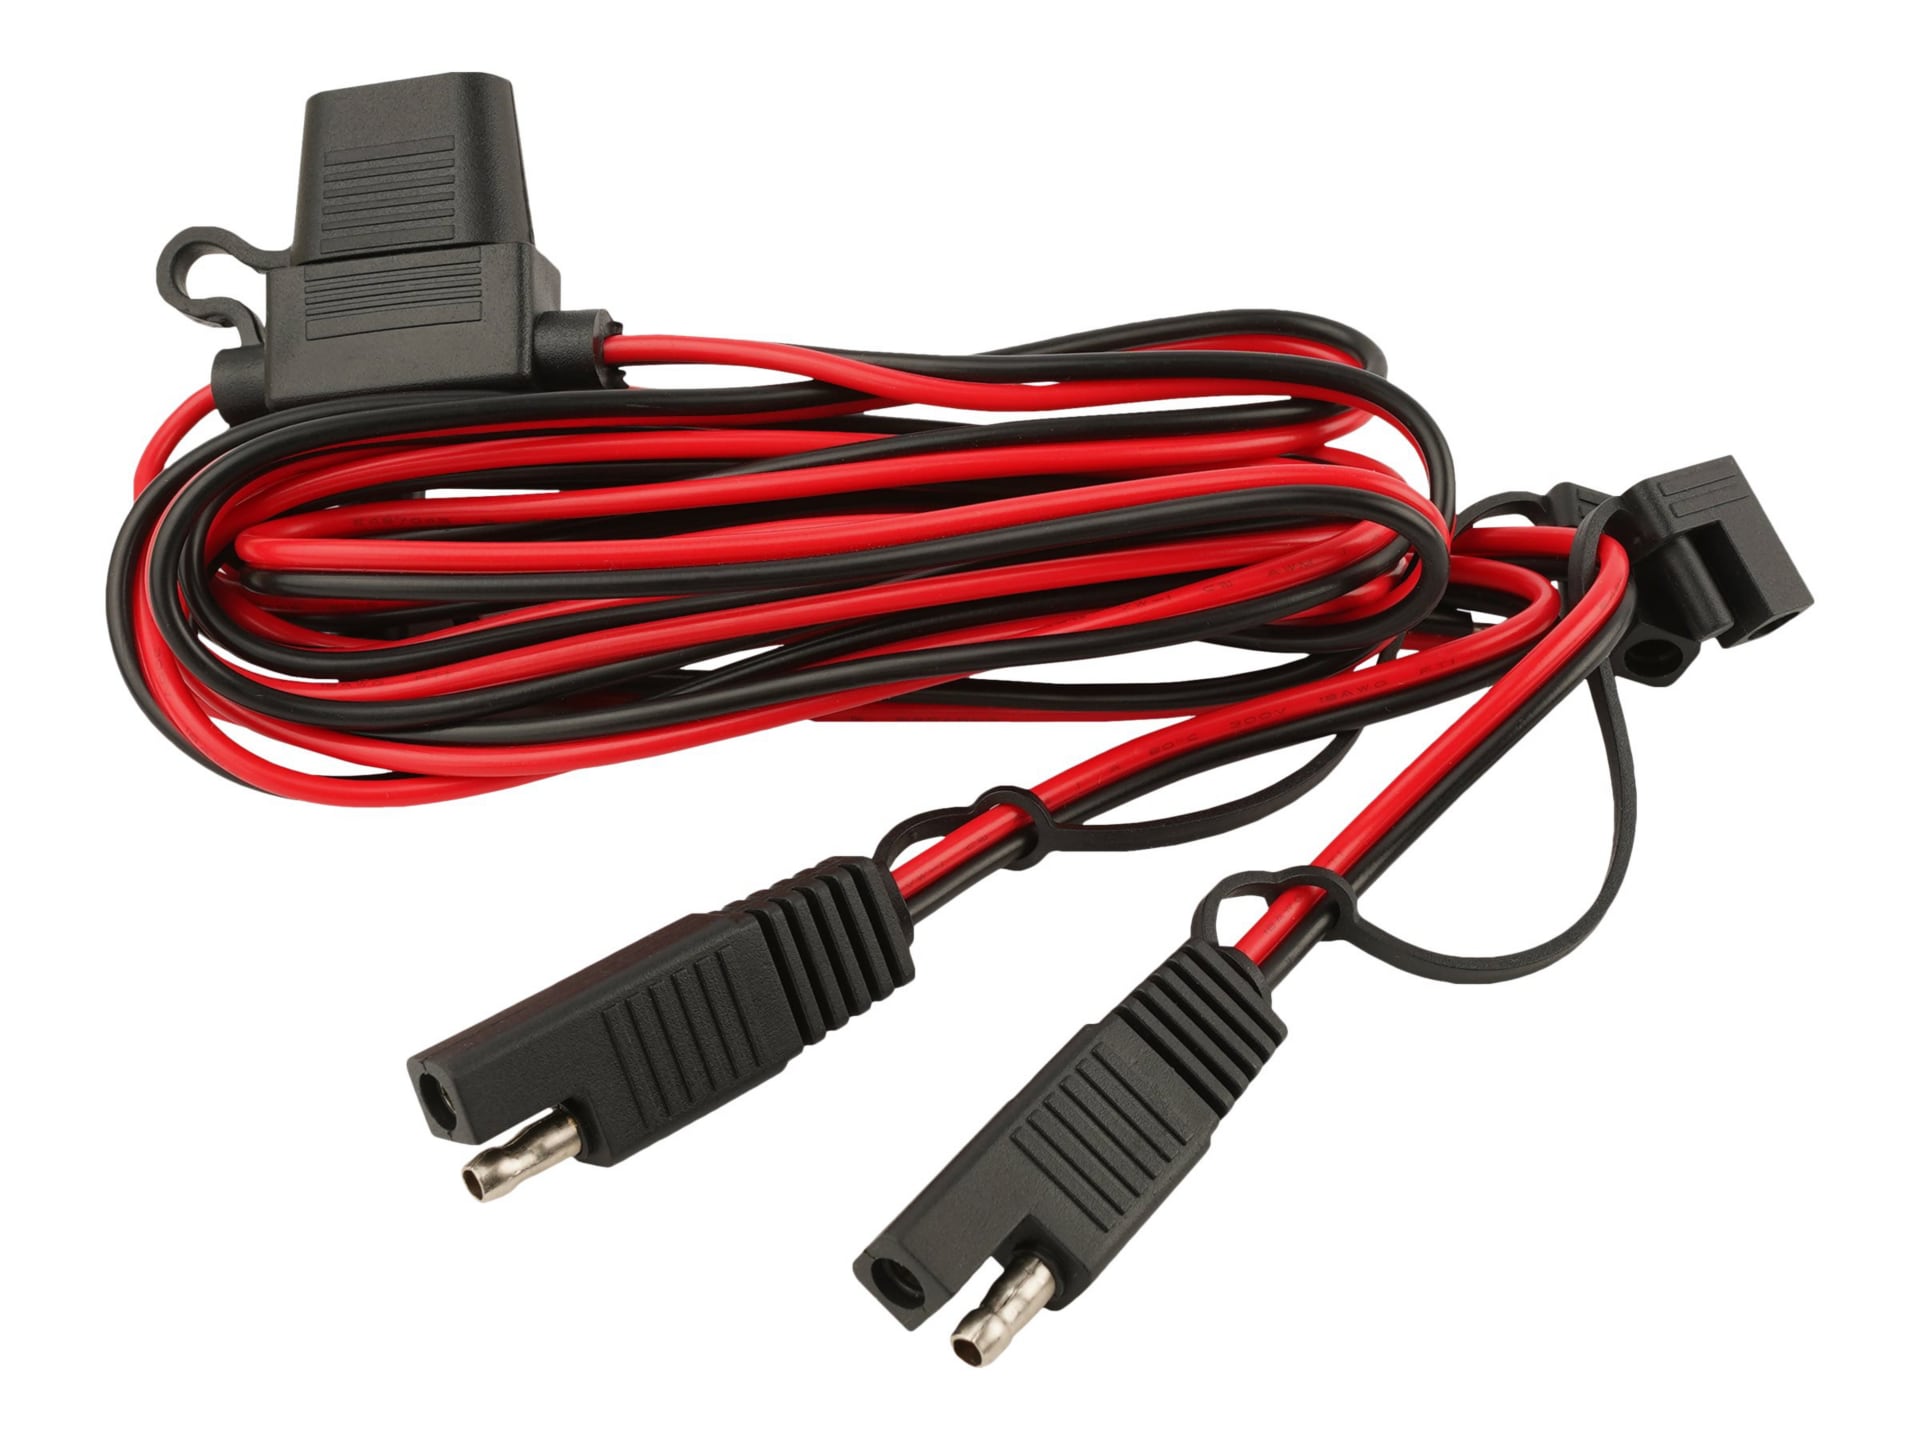 Ram GDS - power cable - SAE to SAE - 10 ft